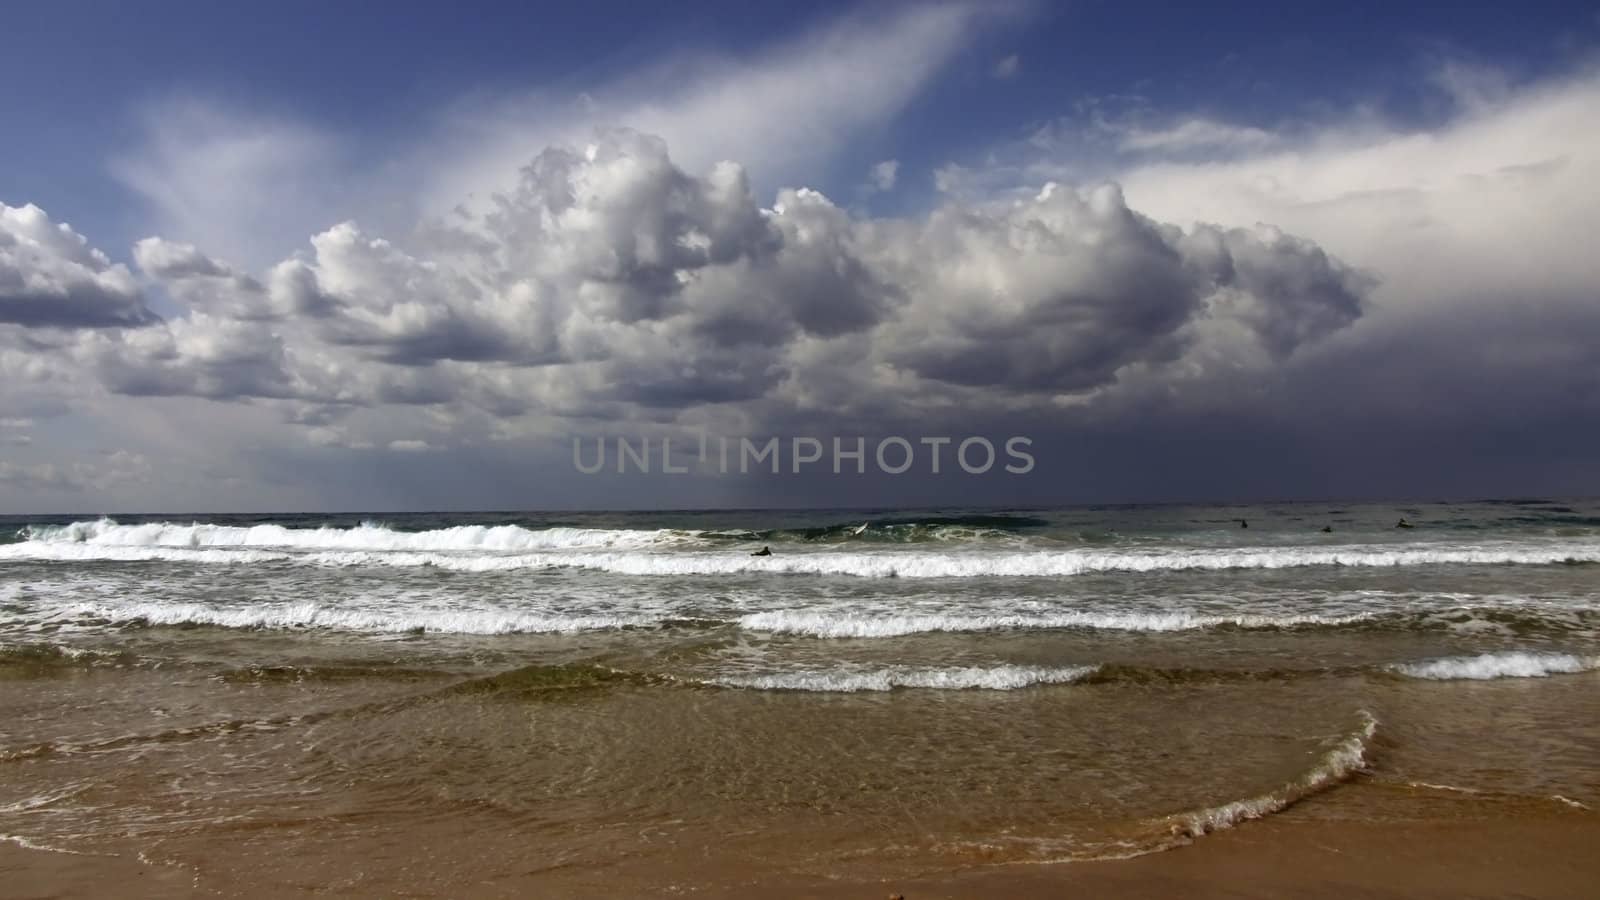 cumulus over the Mediterranean Sea and the waves incident on the beach